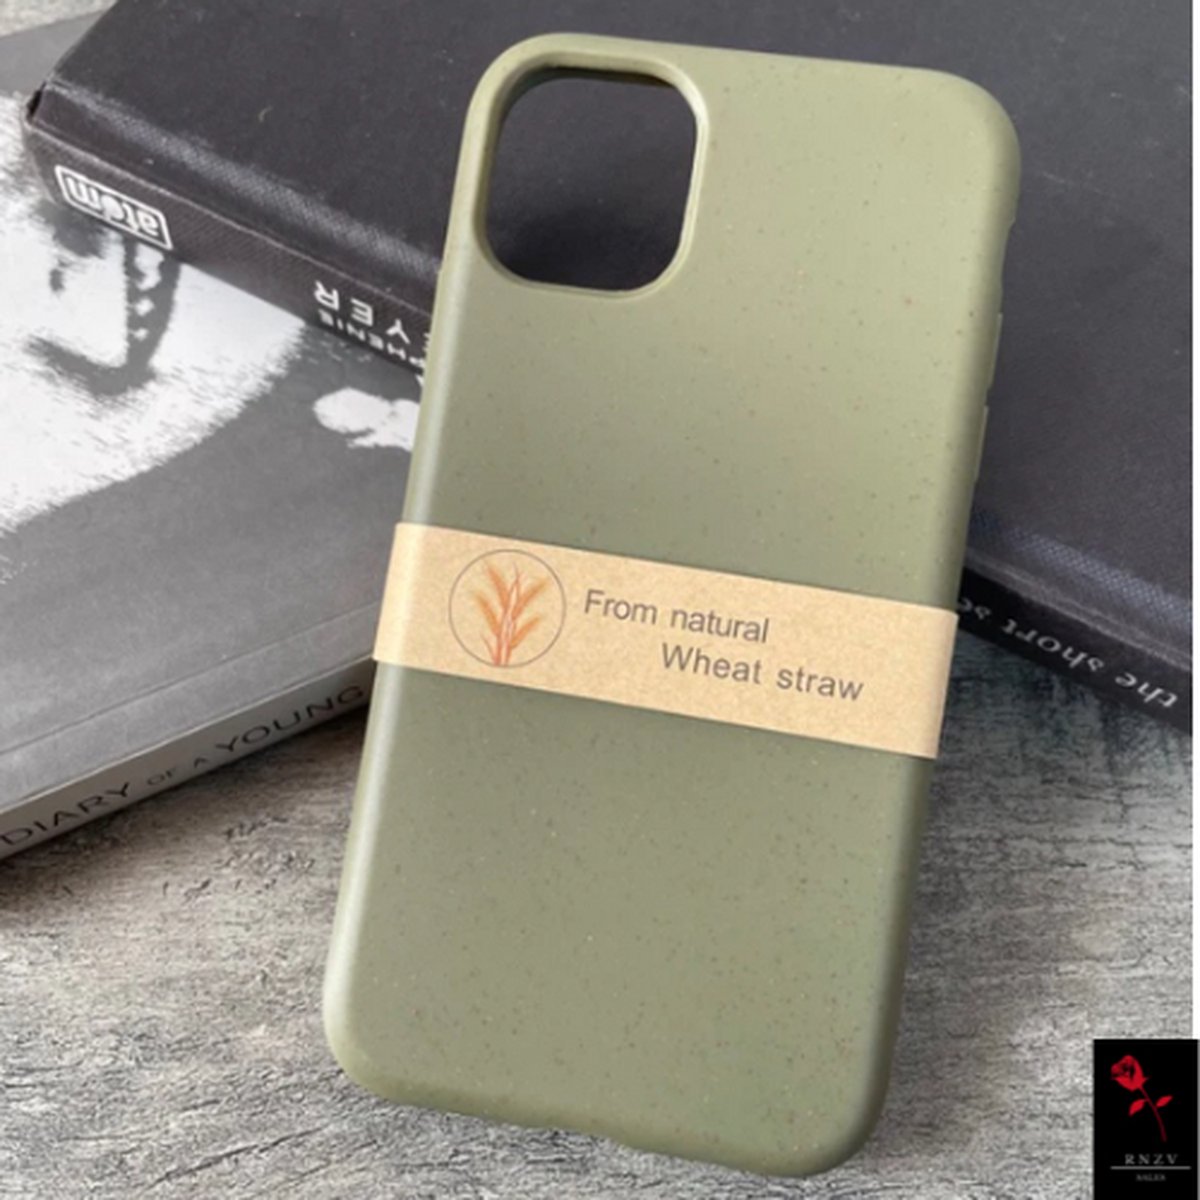 RNZV - IPHONE 12/ 12 PRO case - organic wheat straw case - organisch iphone hoesje - organic case - recycled iphone case - recycled - GROEN